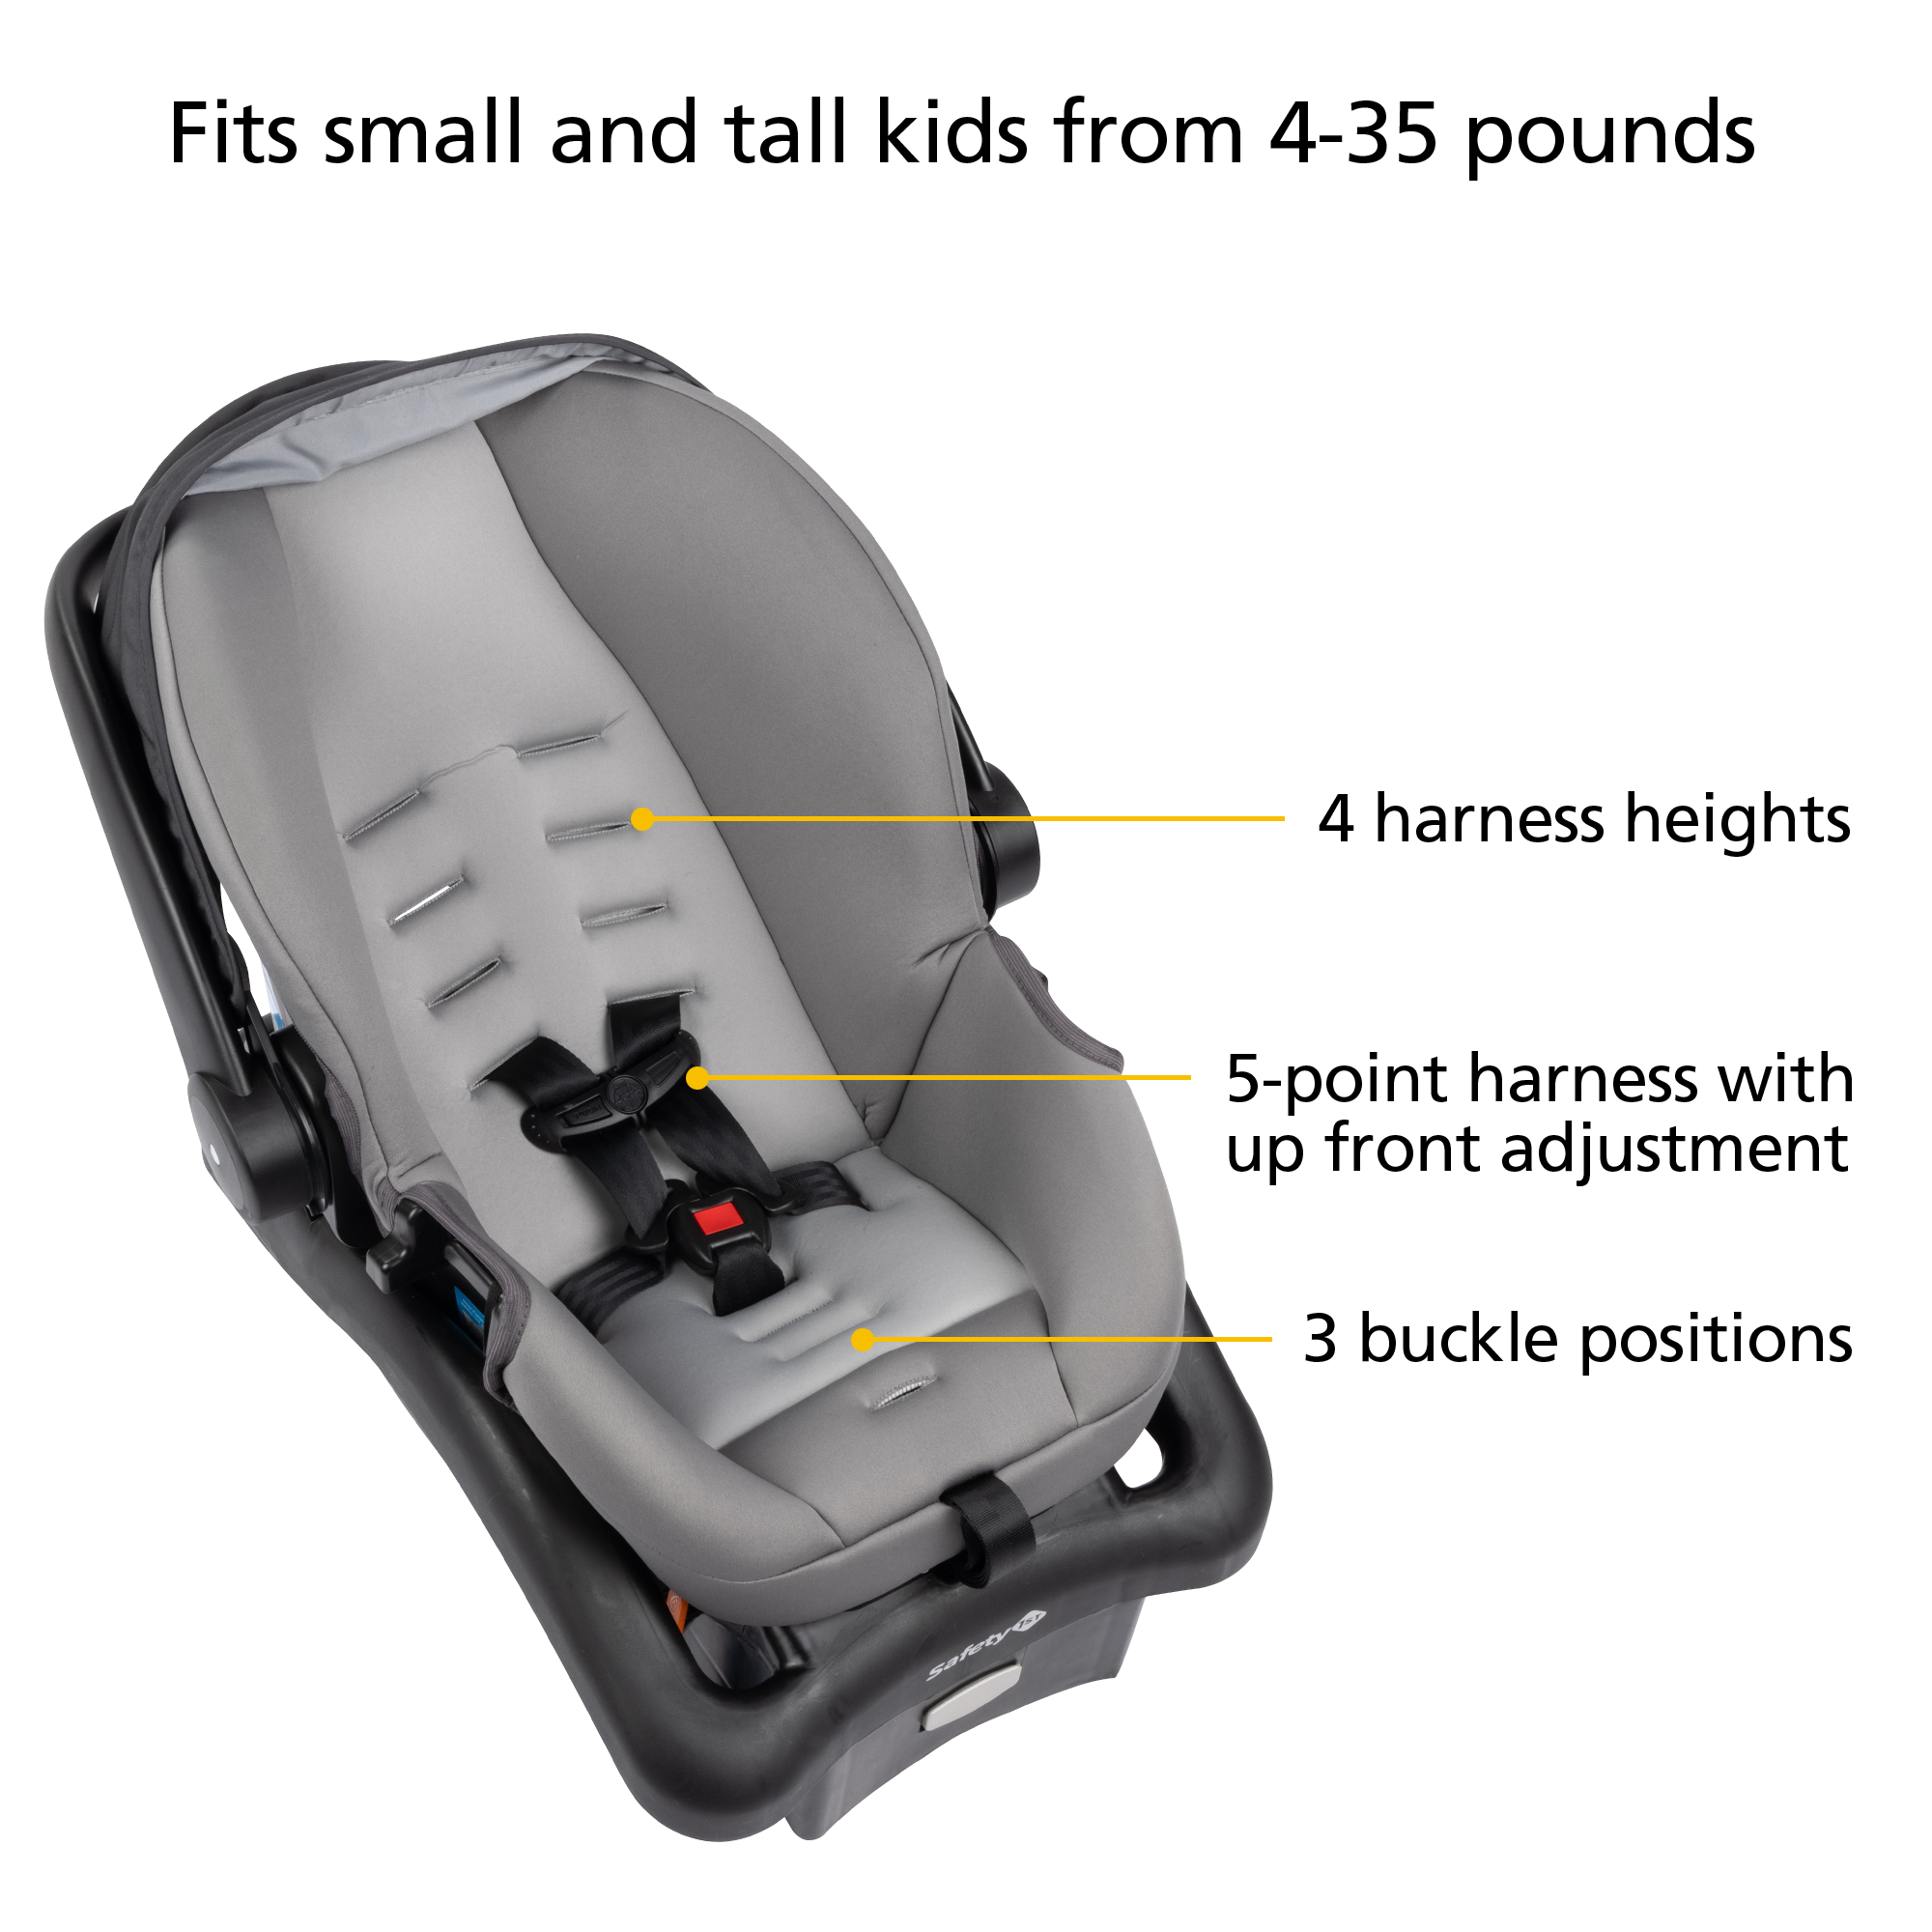 onBoard™35 SecureTech™ Infant Car Seat - fits small and tall kids from 4-35 pounds - 4 harness heights - 5-point harness with up front adjustment - 3 buckle positions